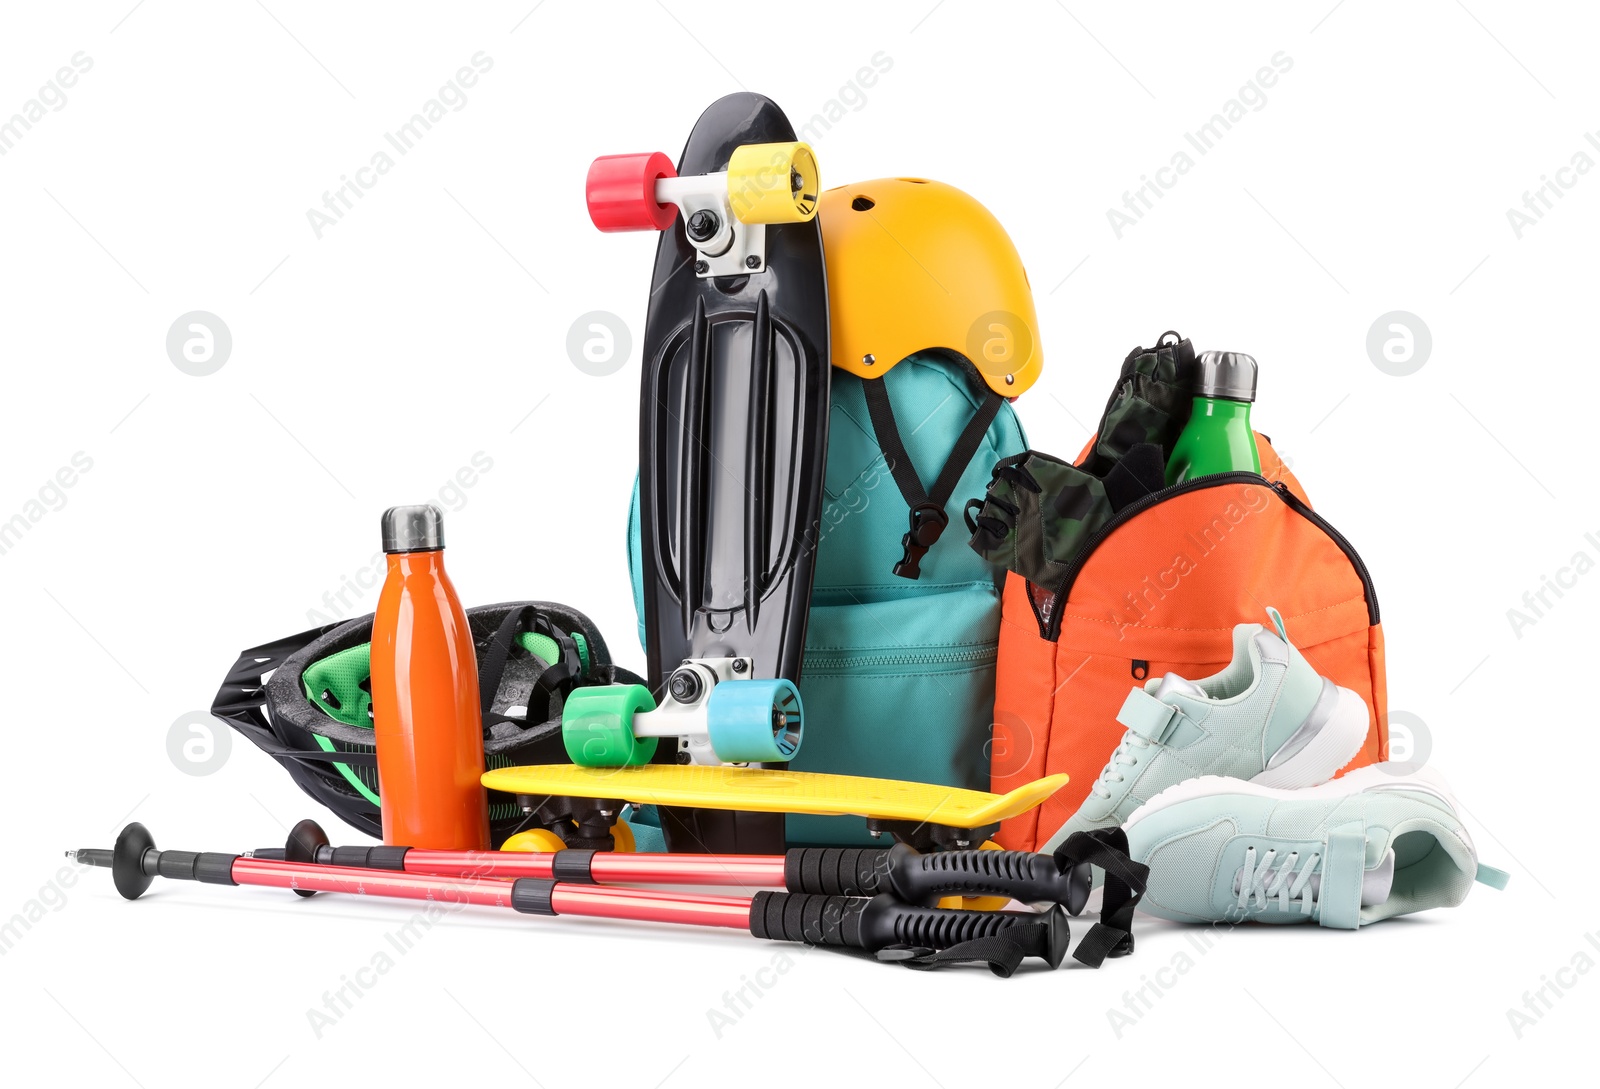 Photo of Many different sports equipment isolated on white